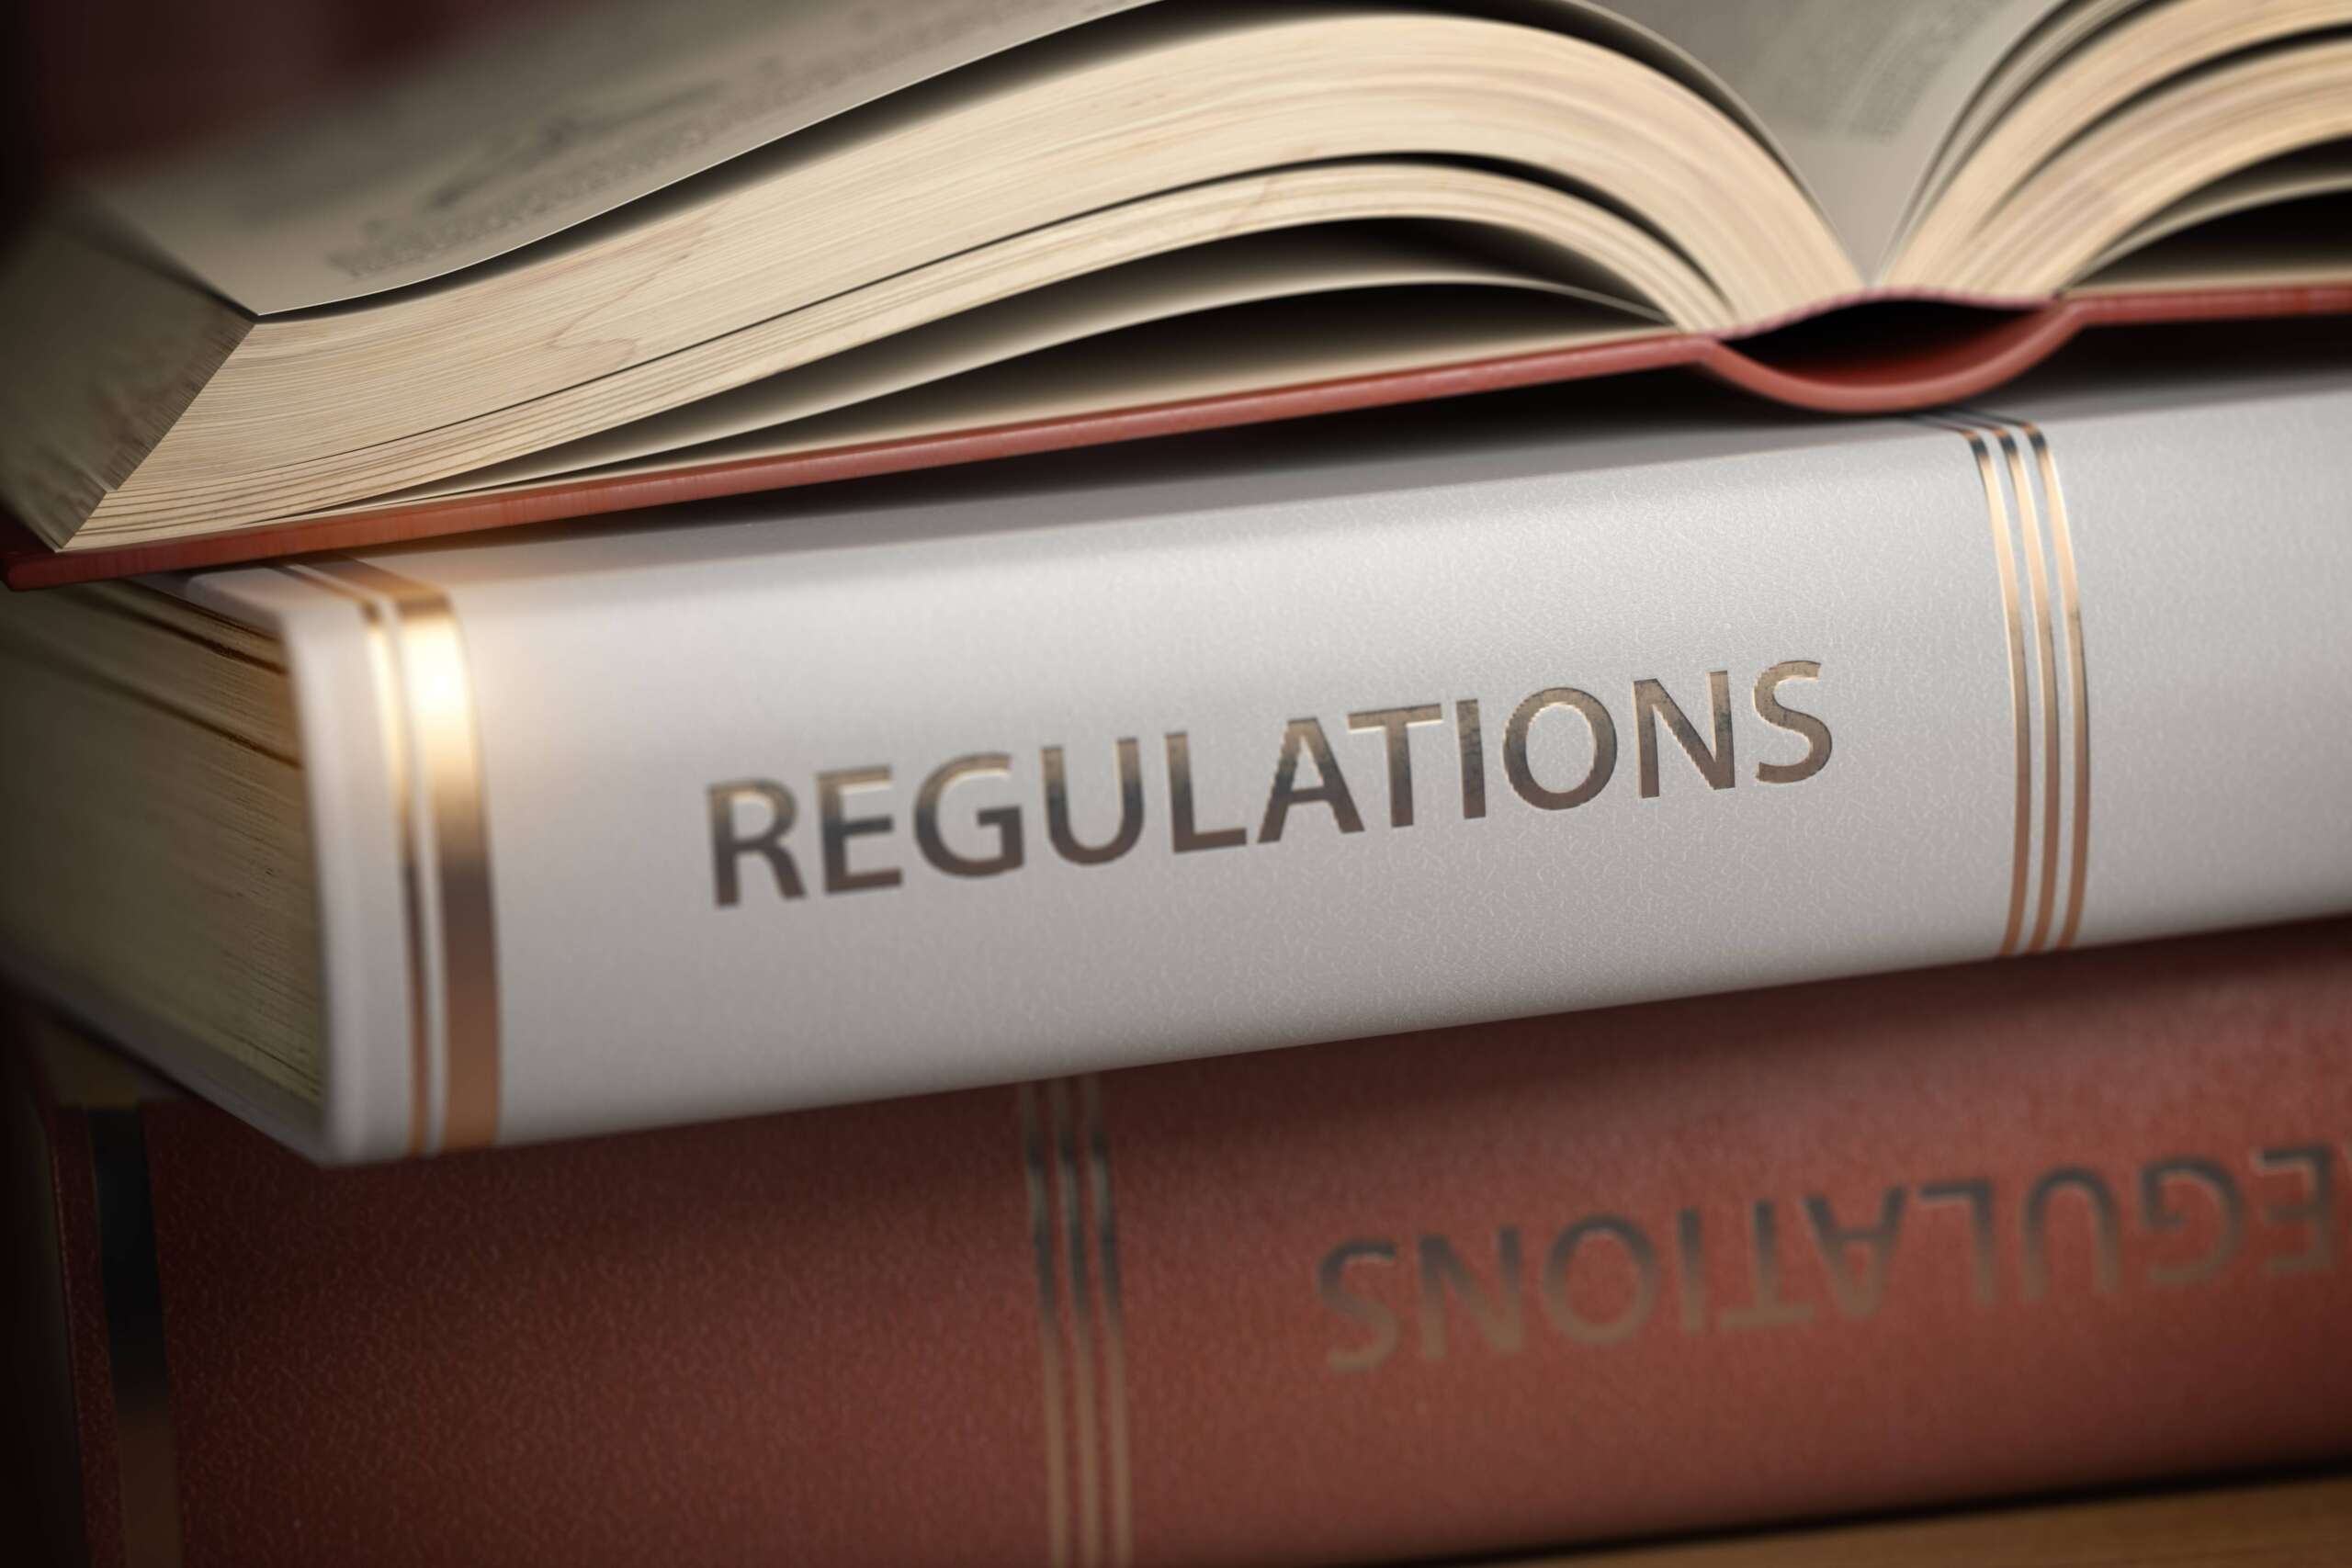 regulations-book-law-rules-and-regulations-conce-2021-08-26-16-57-04-utc-1-scaled.jpg